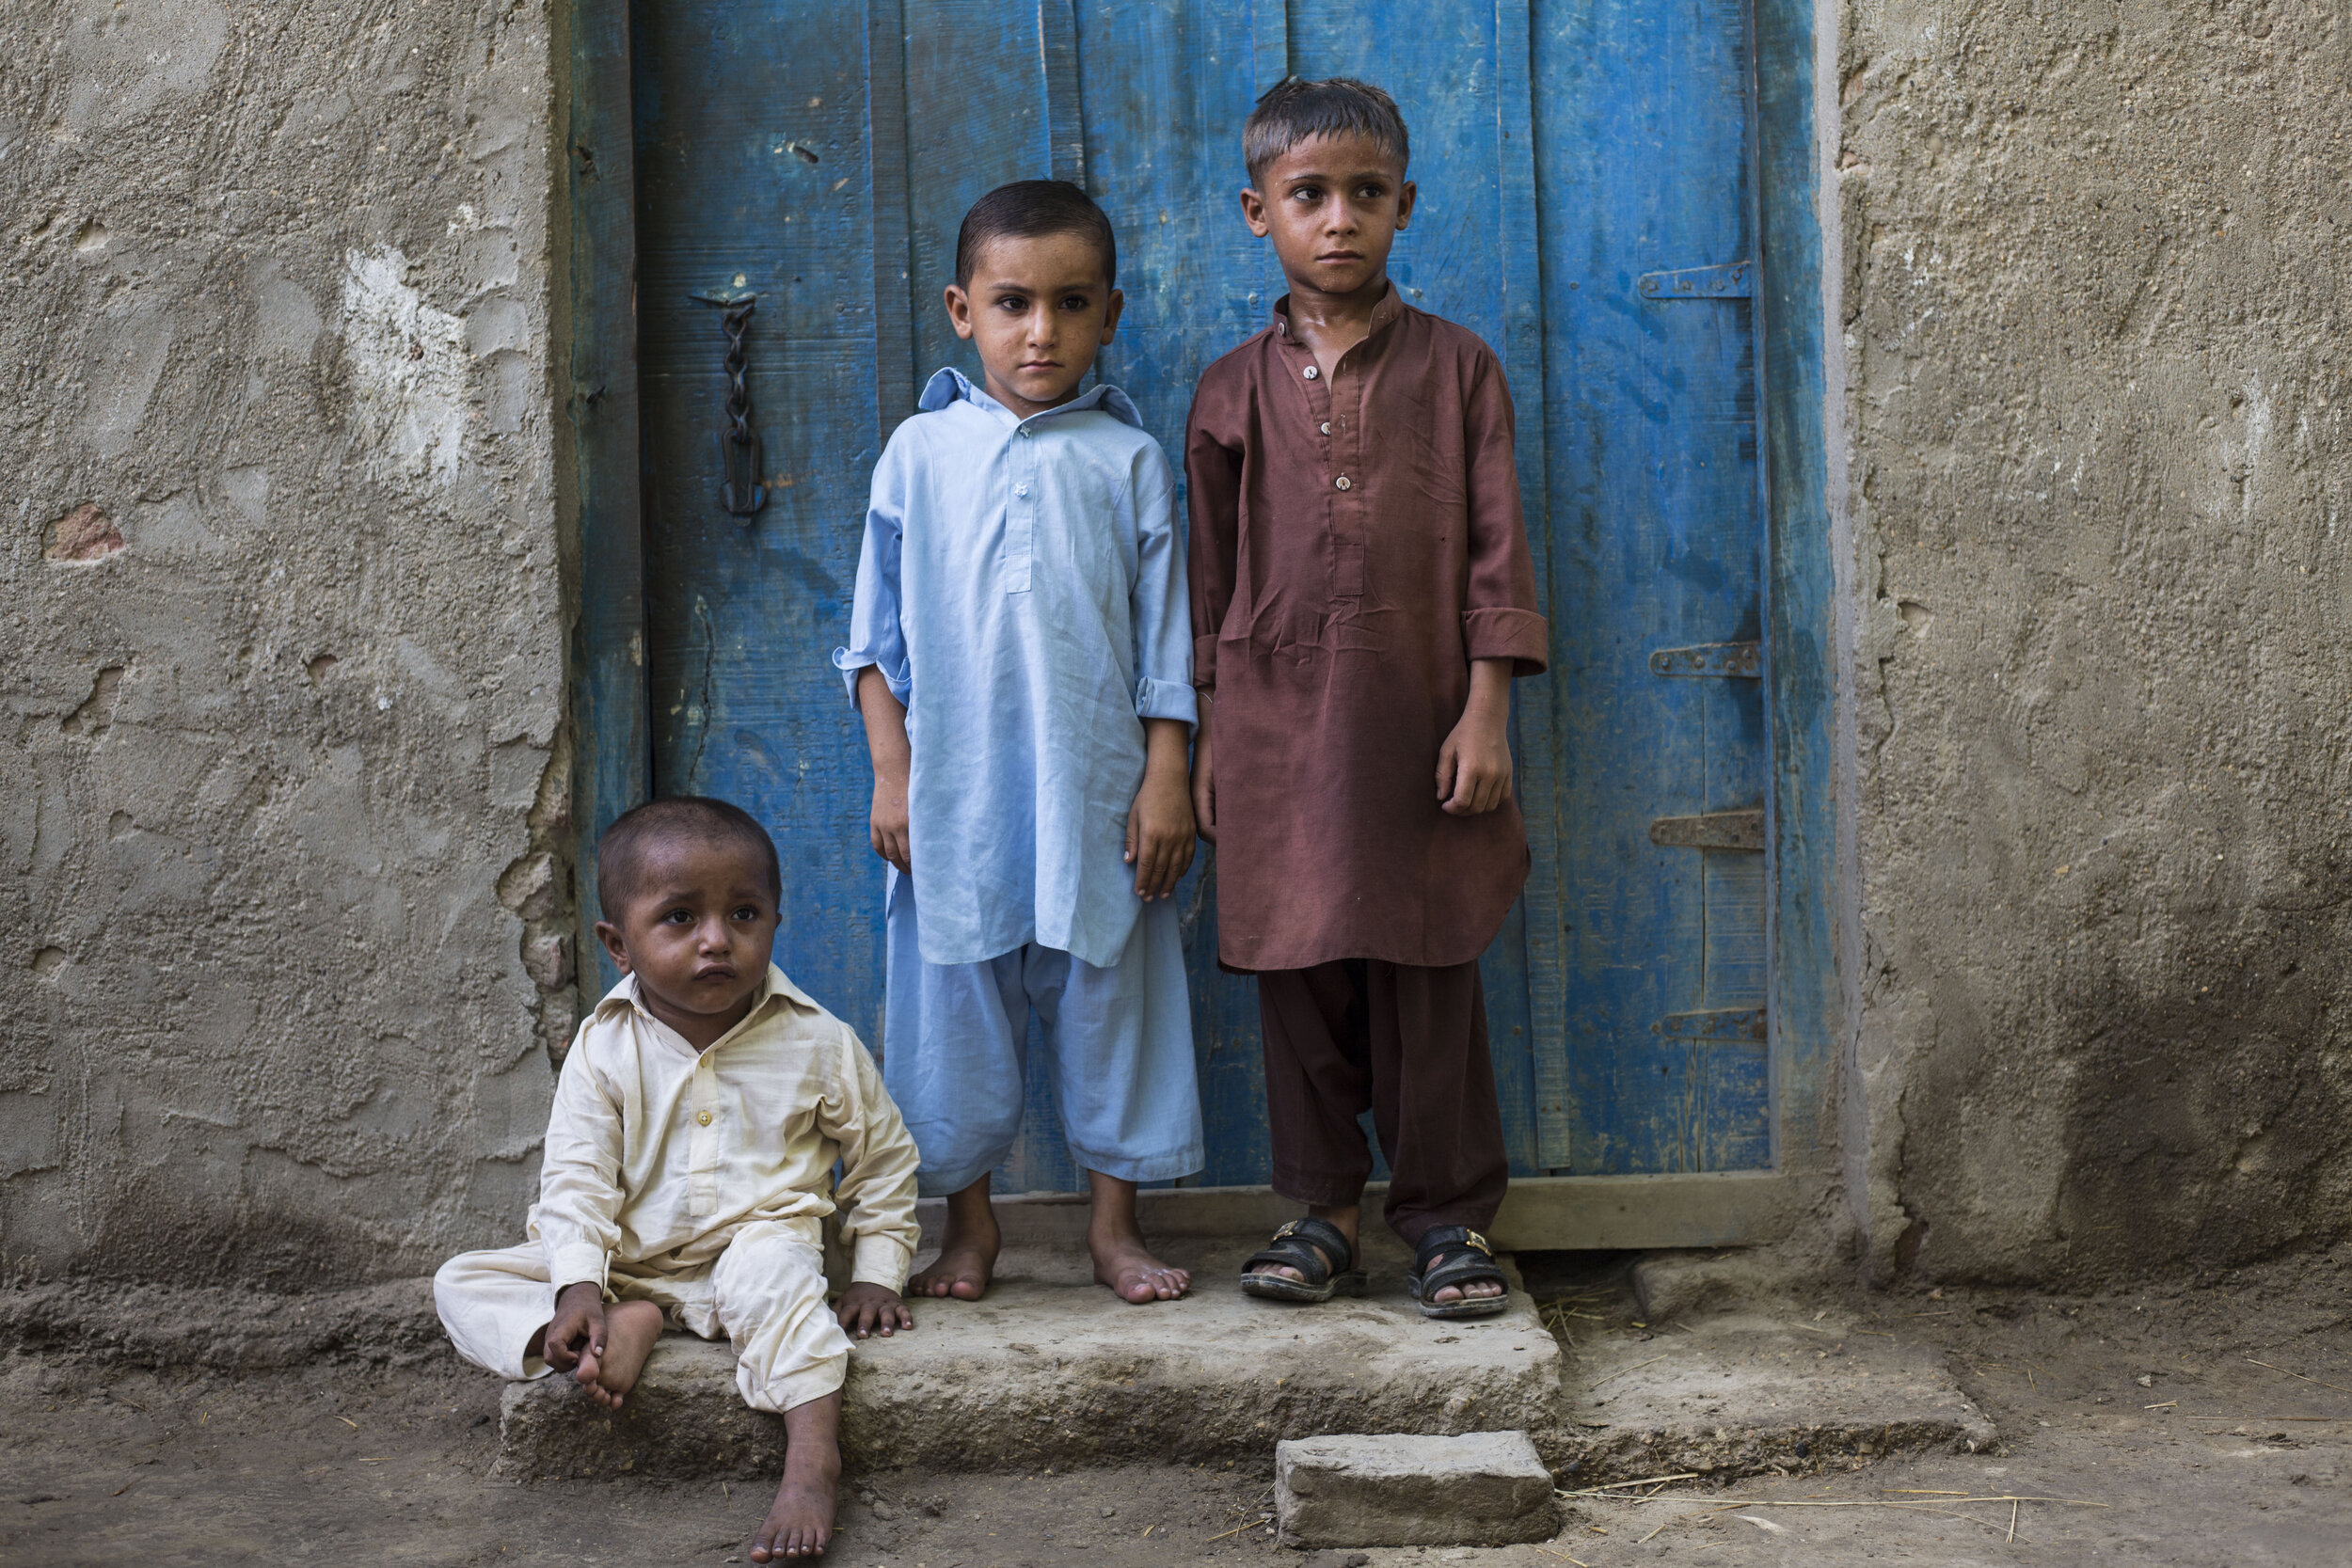  Waqar Ali, 3-year-old sits on the floor along with Abdullah Khan, 5-year-old (left) and Zeeshan Ali, 6-year-old (right) who have all been diagnosed with HIV in Subhani Shar village, around 8 km from Ratodero on July 25, 2019 in Sind, Pakistan.  